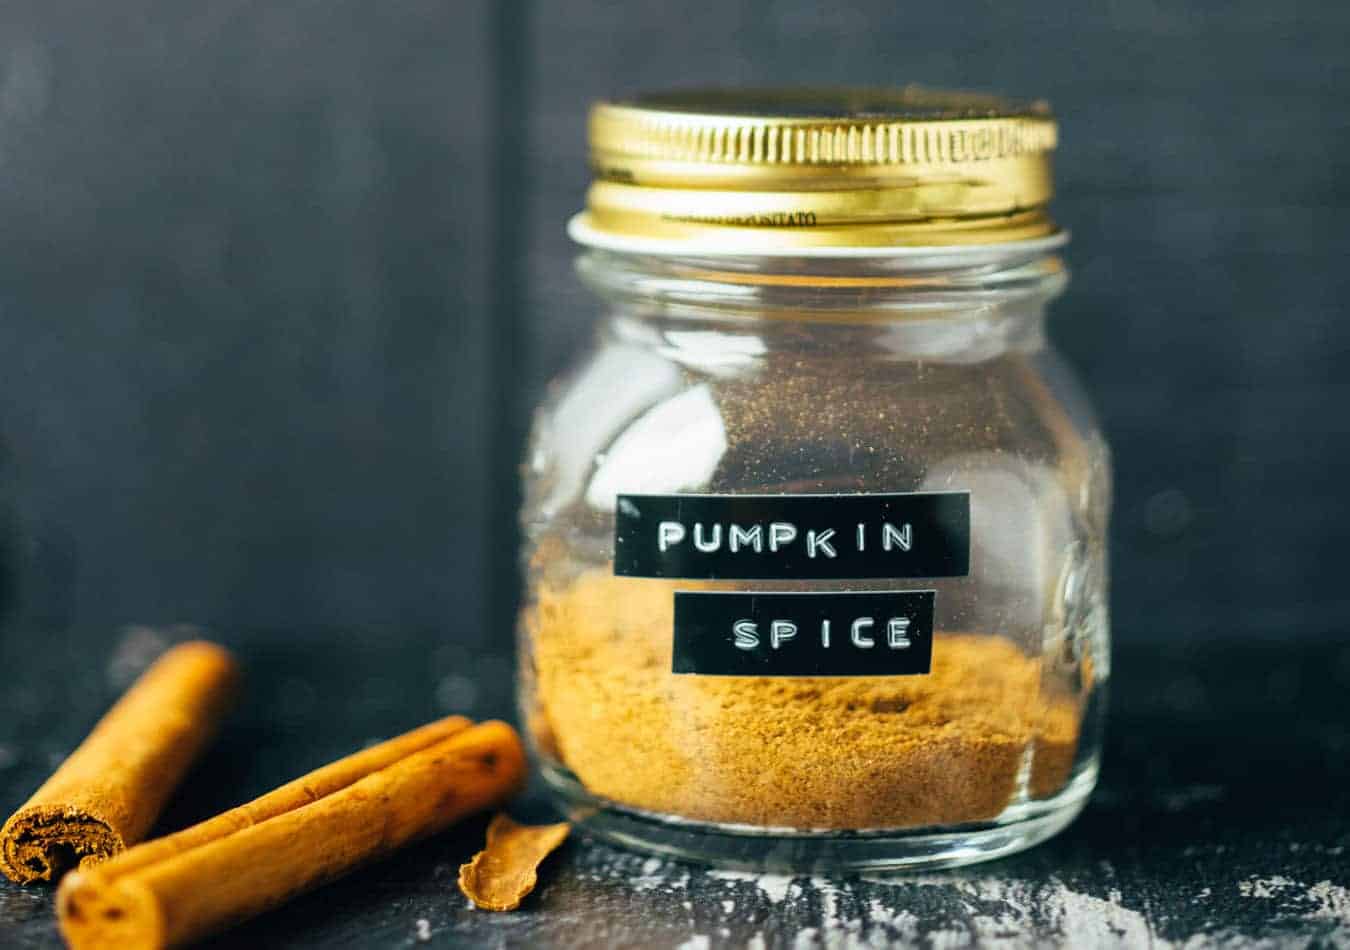 Make Pumpkin Pie Spice yourself - HOW-TO